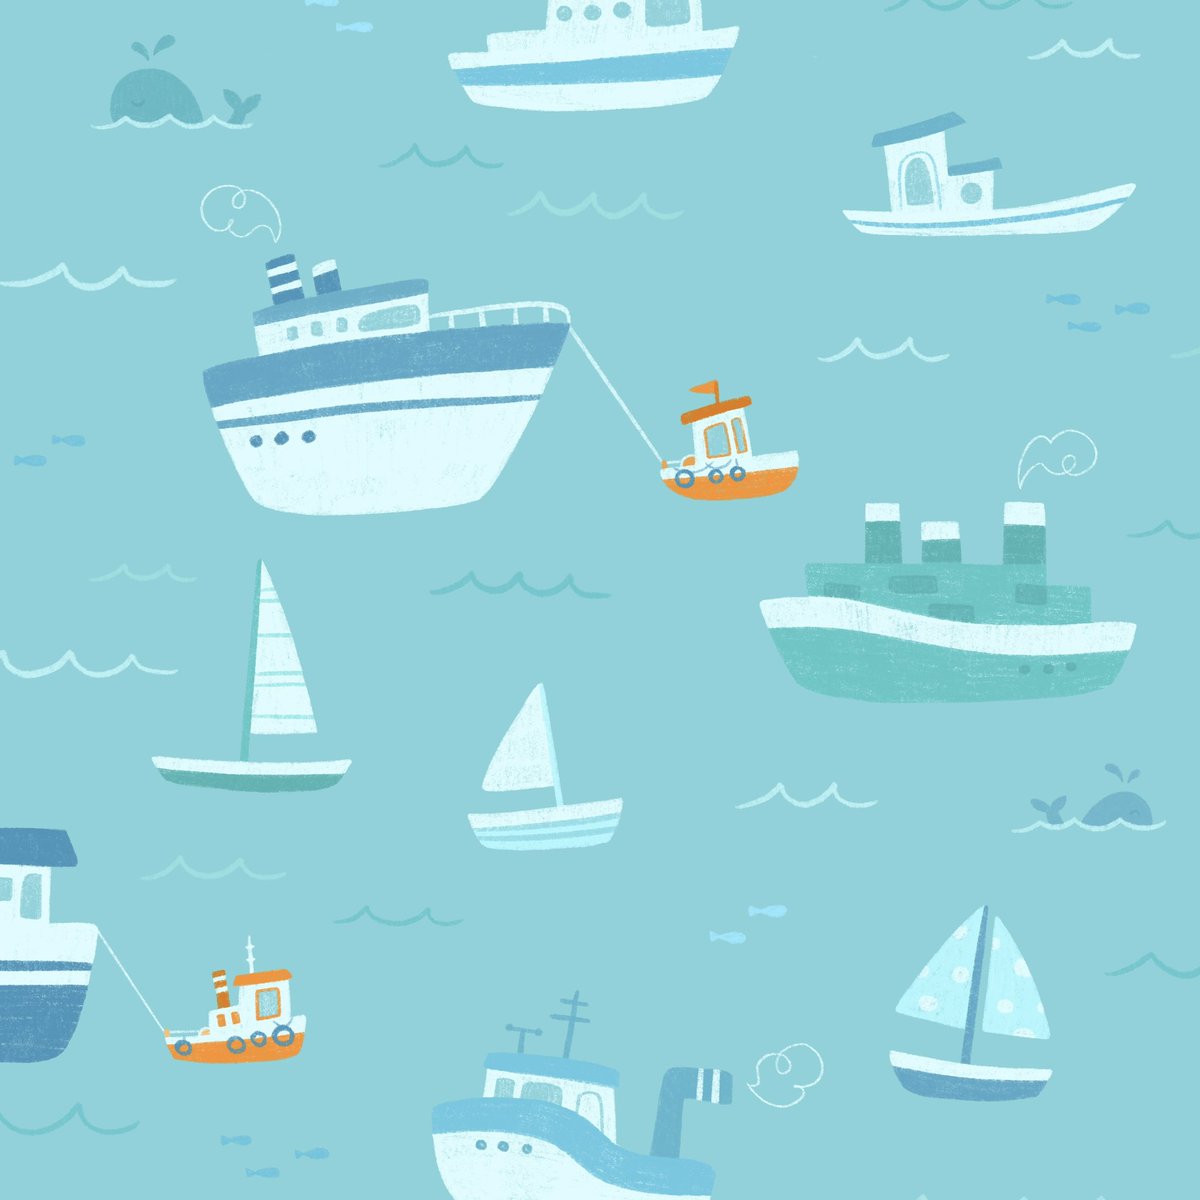 Tuggoat endpapers! ⛵️🚤🚢🛥️ It was so fun and relaxing getting to draw all these different boats with all different shades of blue. I wanted to give the tugboats a pop of color 🧡 @beamingbooksmn Tuggoat is available now so you can see how gorgeous it printed in person!